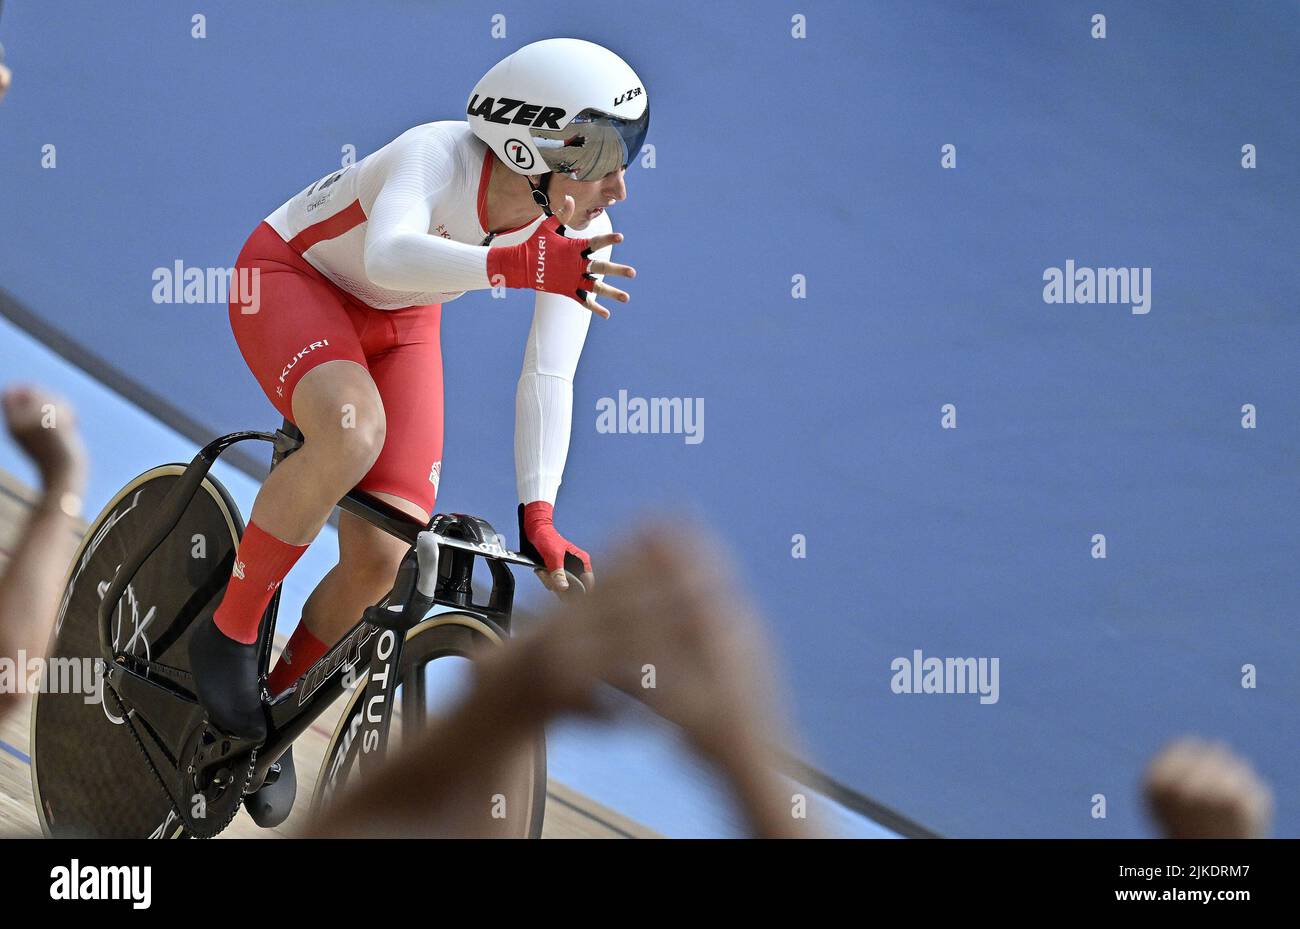 Stratford, United Kingdom. 01st Aug, 2022. Commonwealth Games Track Cycling. Olympic Velodrome. Stratford. Laura Kenny (ENG) celebrates her win as spectators cheer and wave during the Womens 10km Scratch race Credit: Sport In Pictures/Alamy Live News Stock Photo